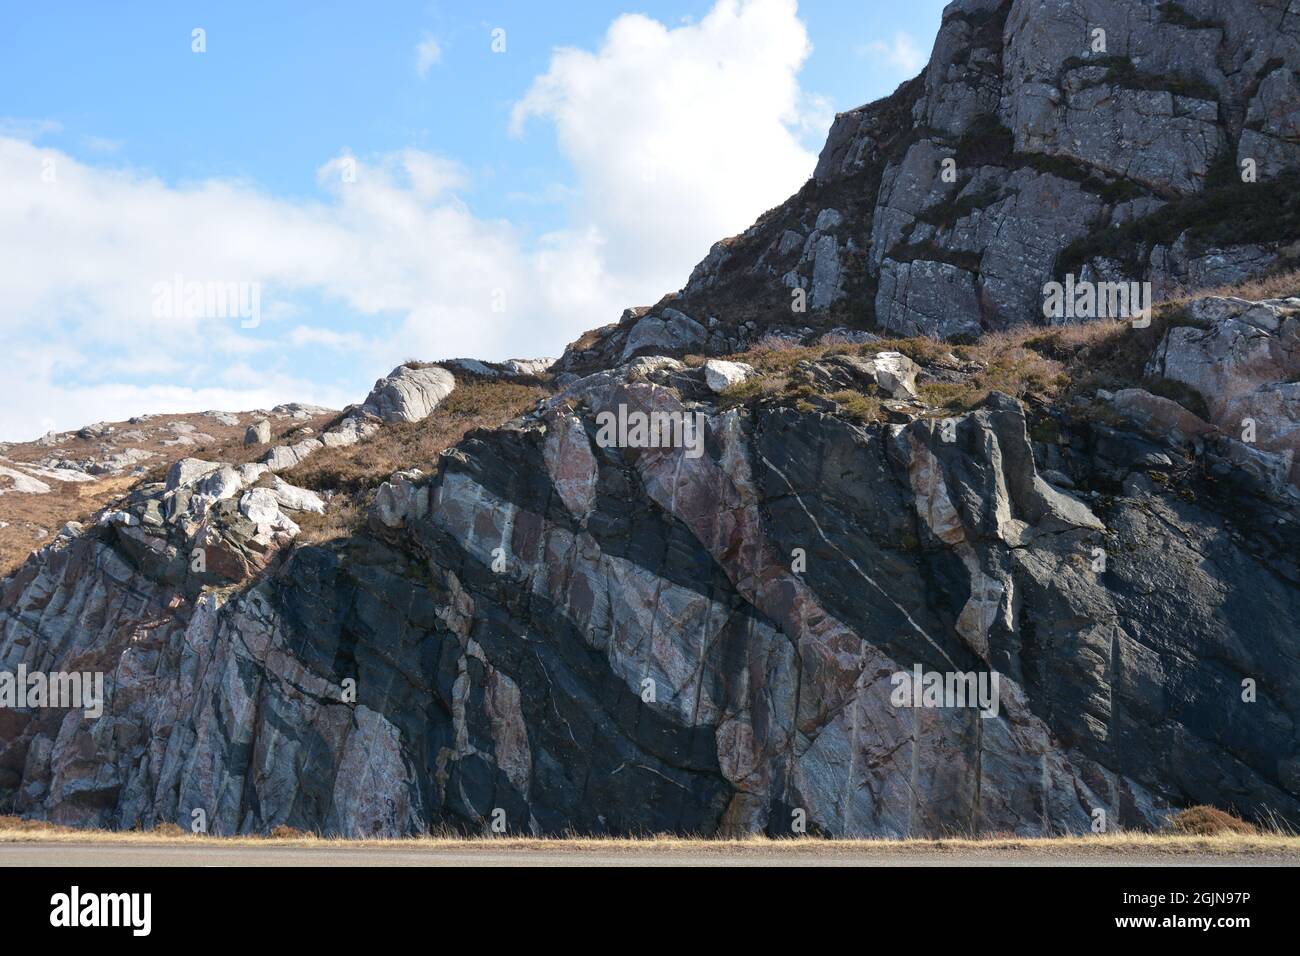 Colourful Rockface made up of a mix of dolerite, gneiss and granite Stock Photo